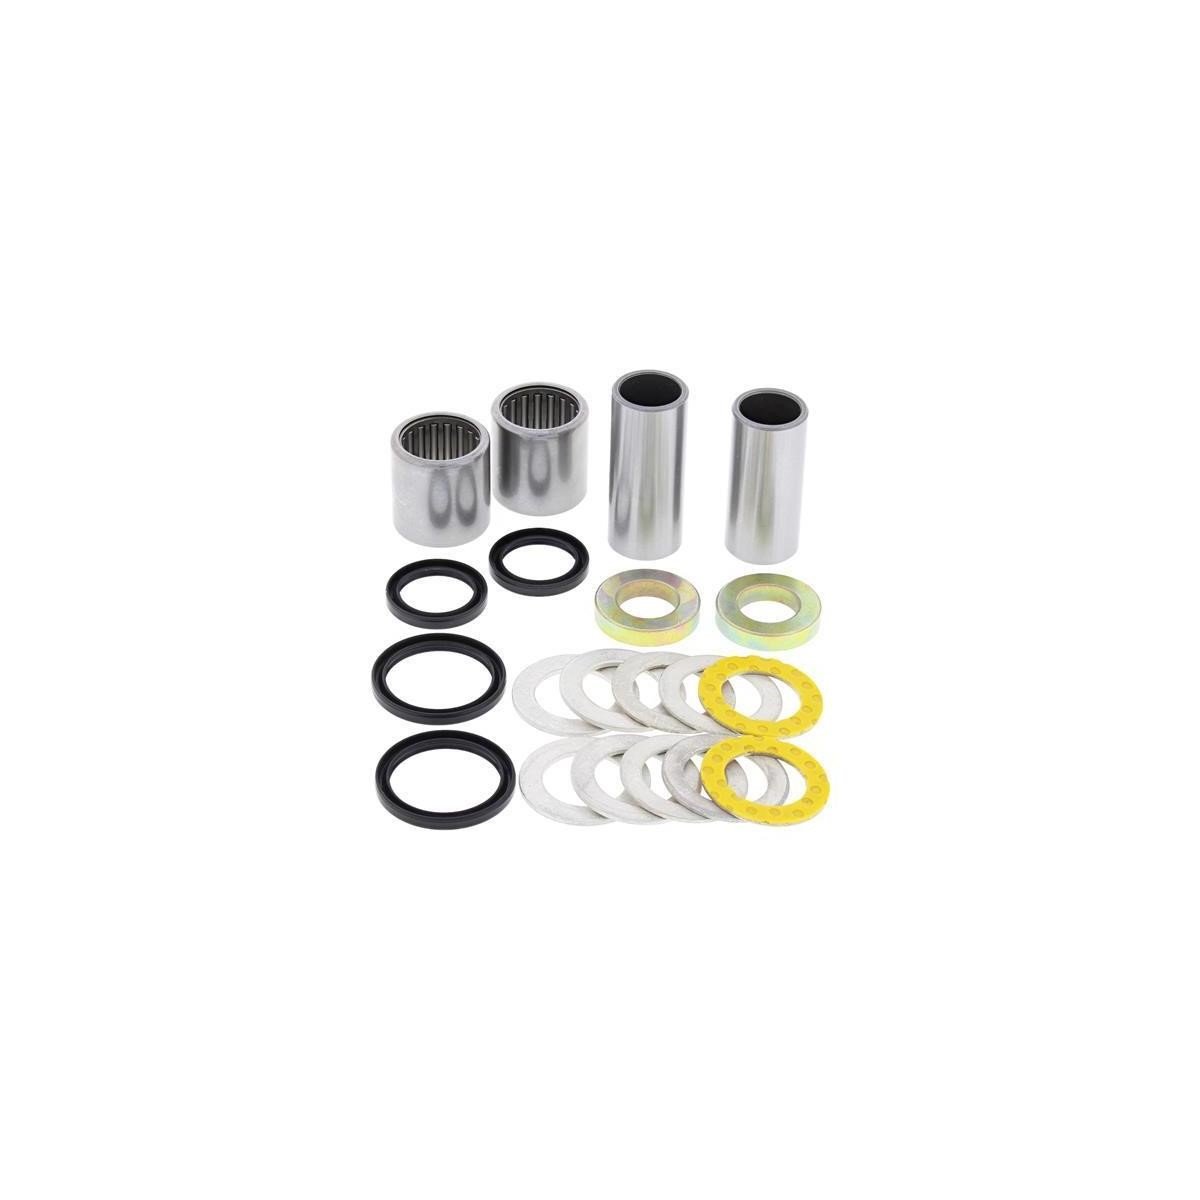 All-Balls Kit Cuscinetti Forcellone  Honda CRF 250 14-, CRF 450 13-